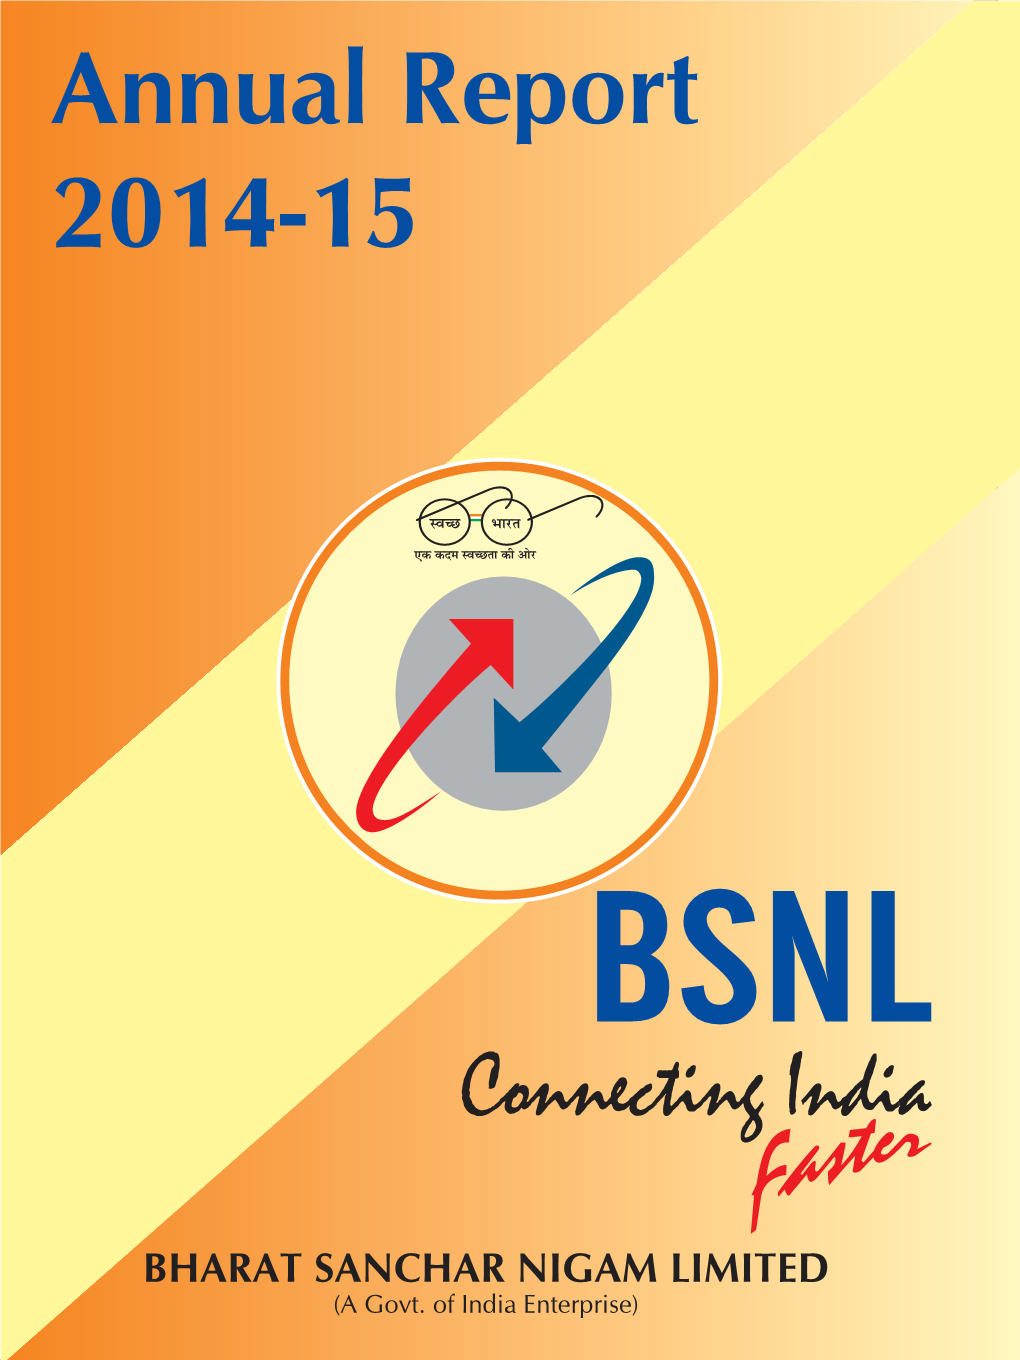 OF the COMPANIES ACT 2013 on the FINANCIAL STATEMENTS of BHARAT SANCHAR NIGAM LIMITED for the YEAR ENDED 31St MARCH 2015